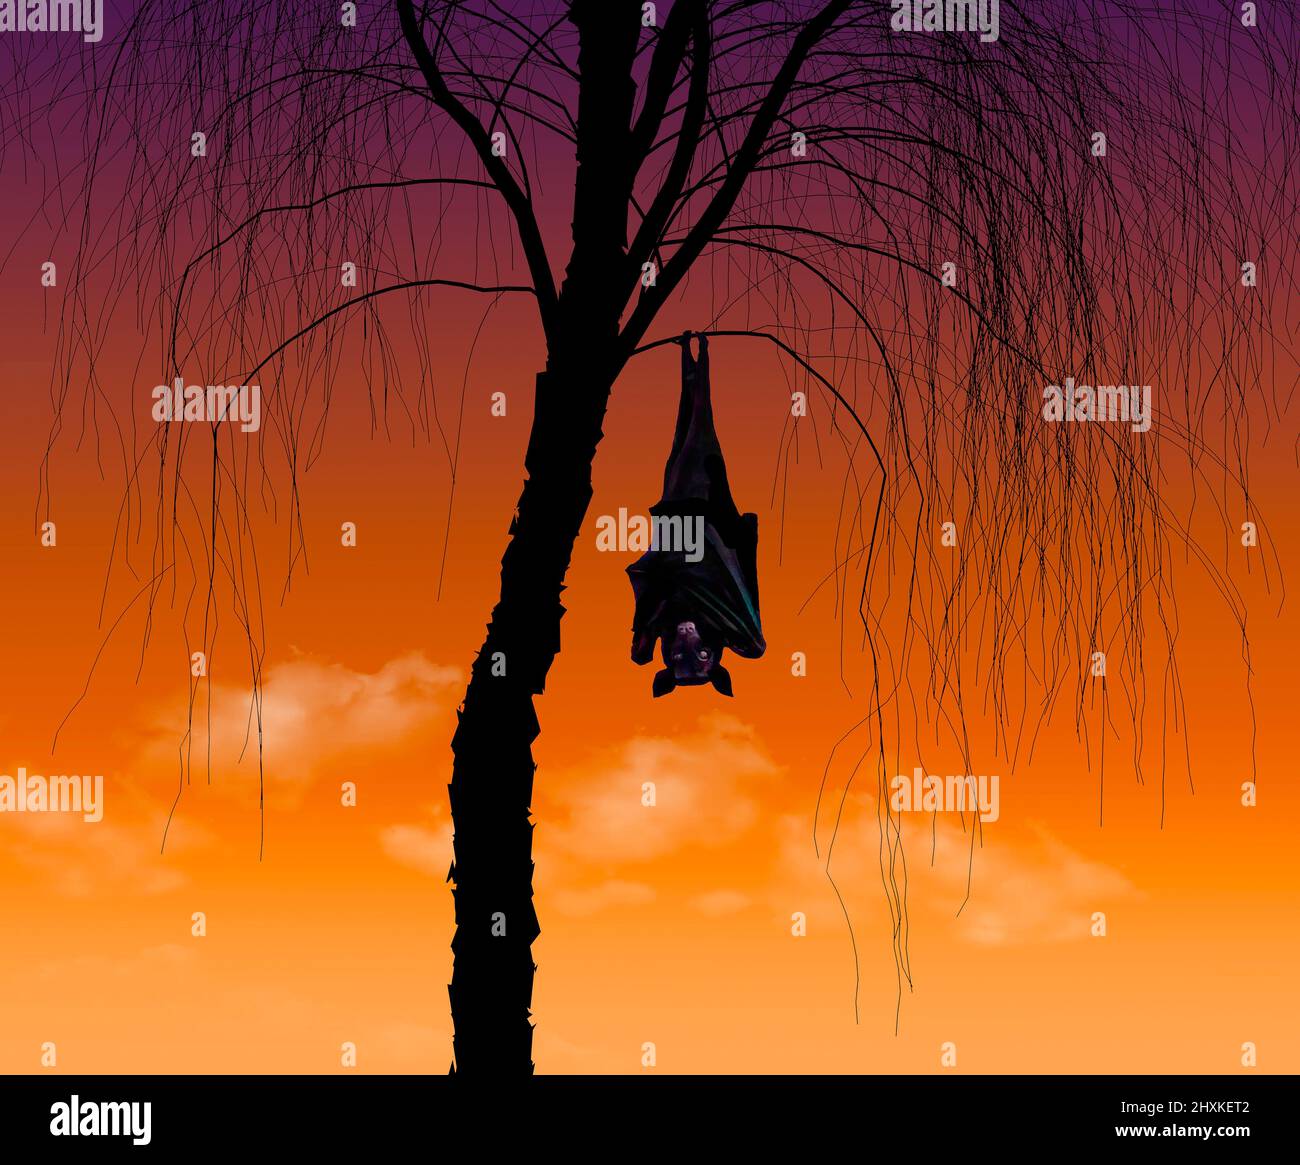 A fruit bat or flying fox, hangs from a tree at sunset in a 3-d illustration. Stock Photo